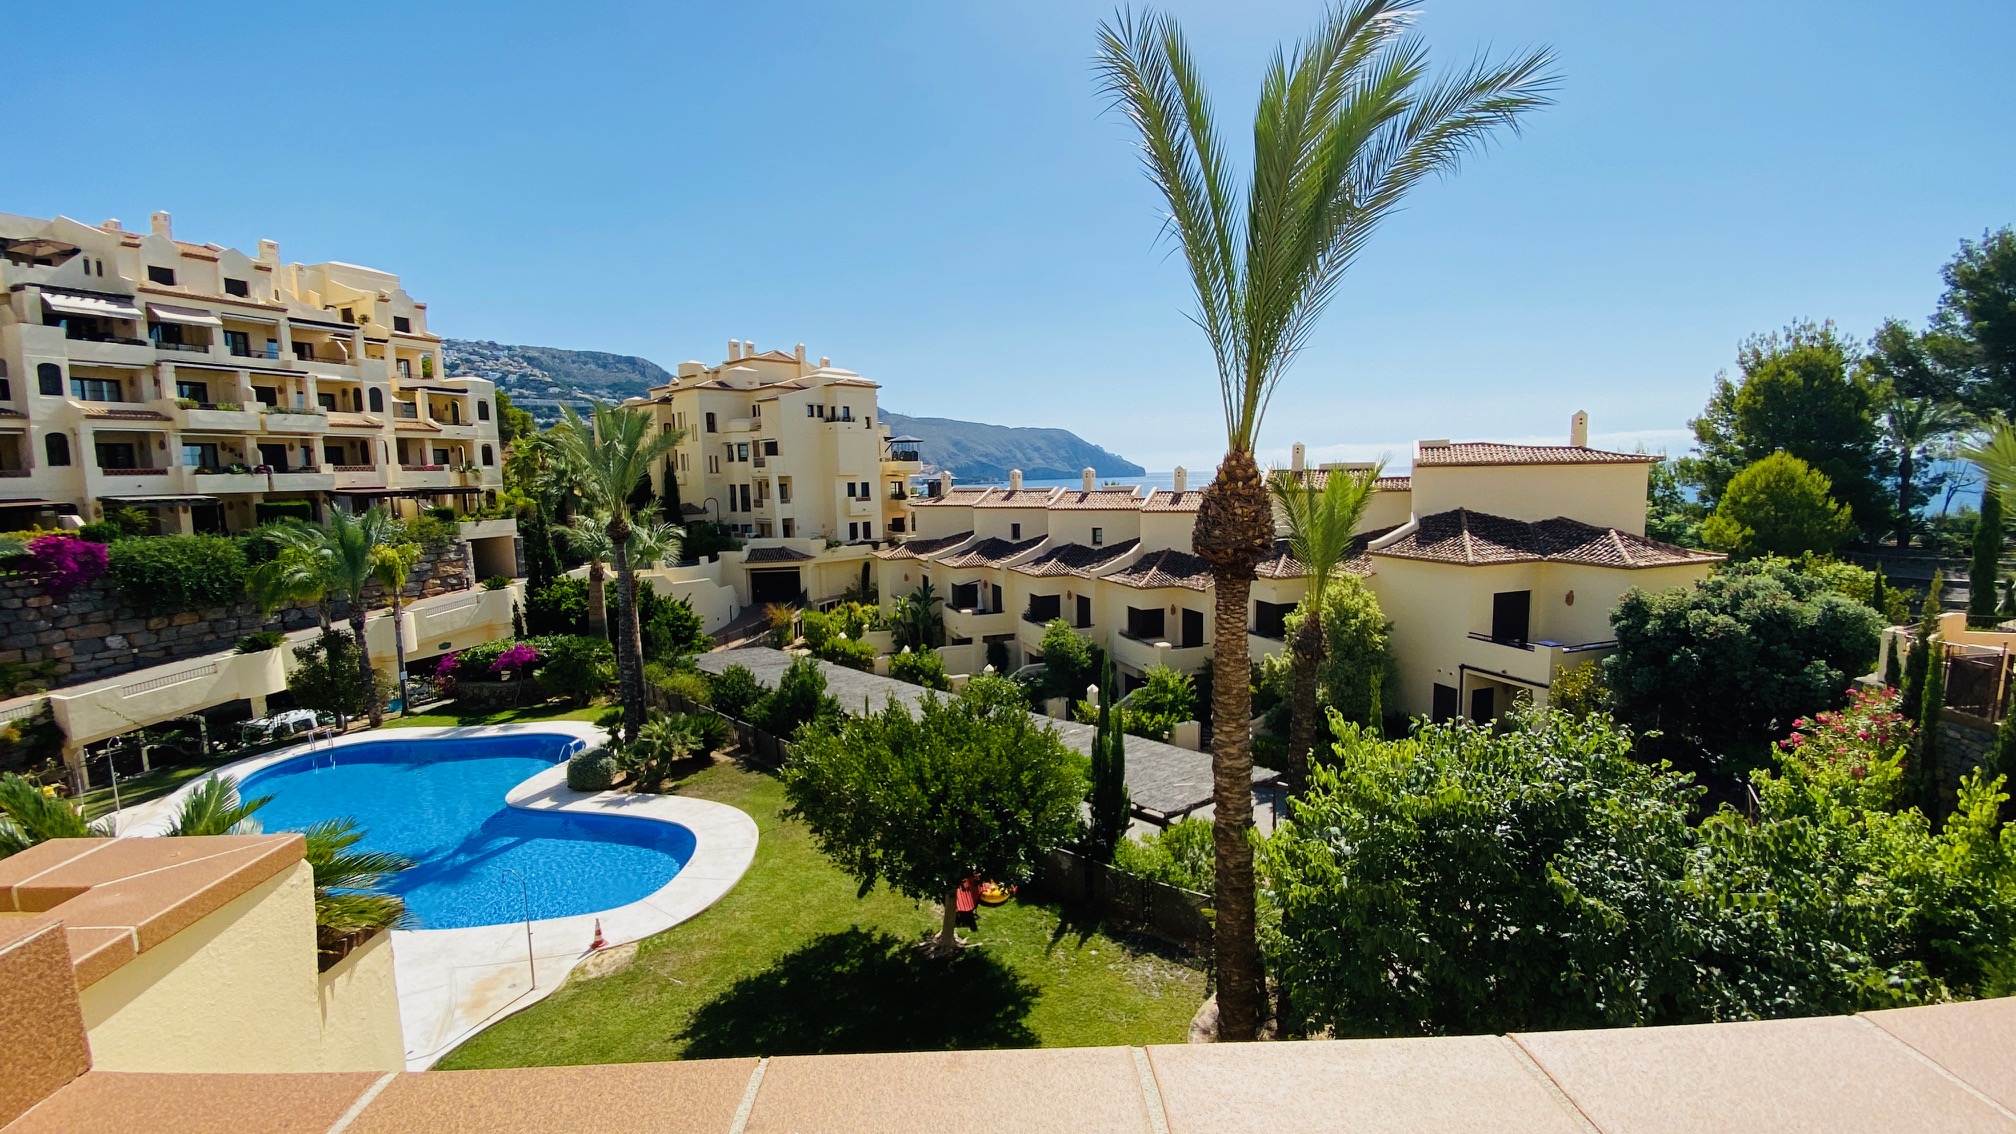 Apartment for sale after full  exclusive design refurbishing, with 2 bedrooms in luxury complex Villa-Gadea.